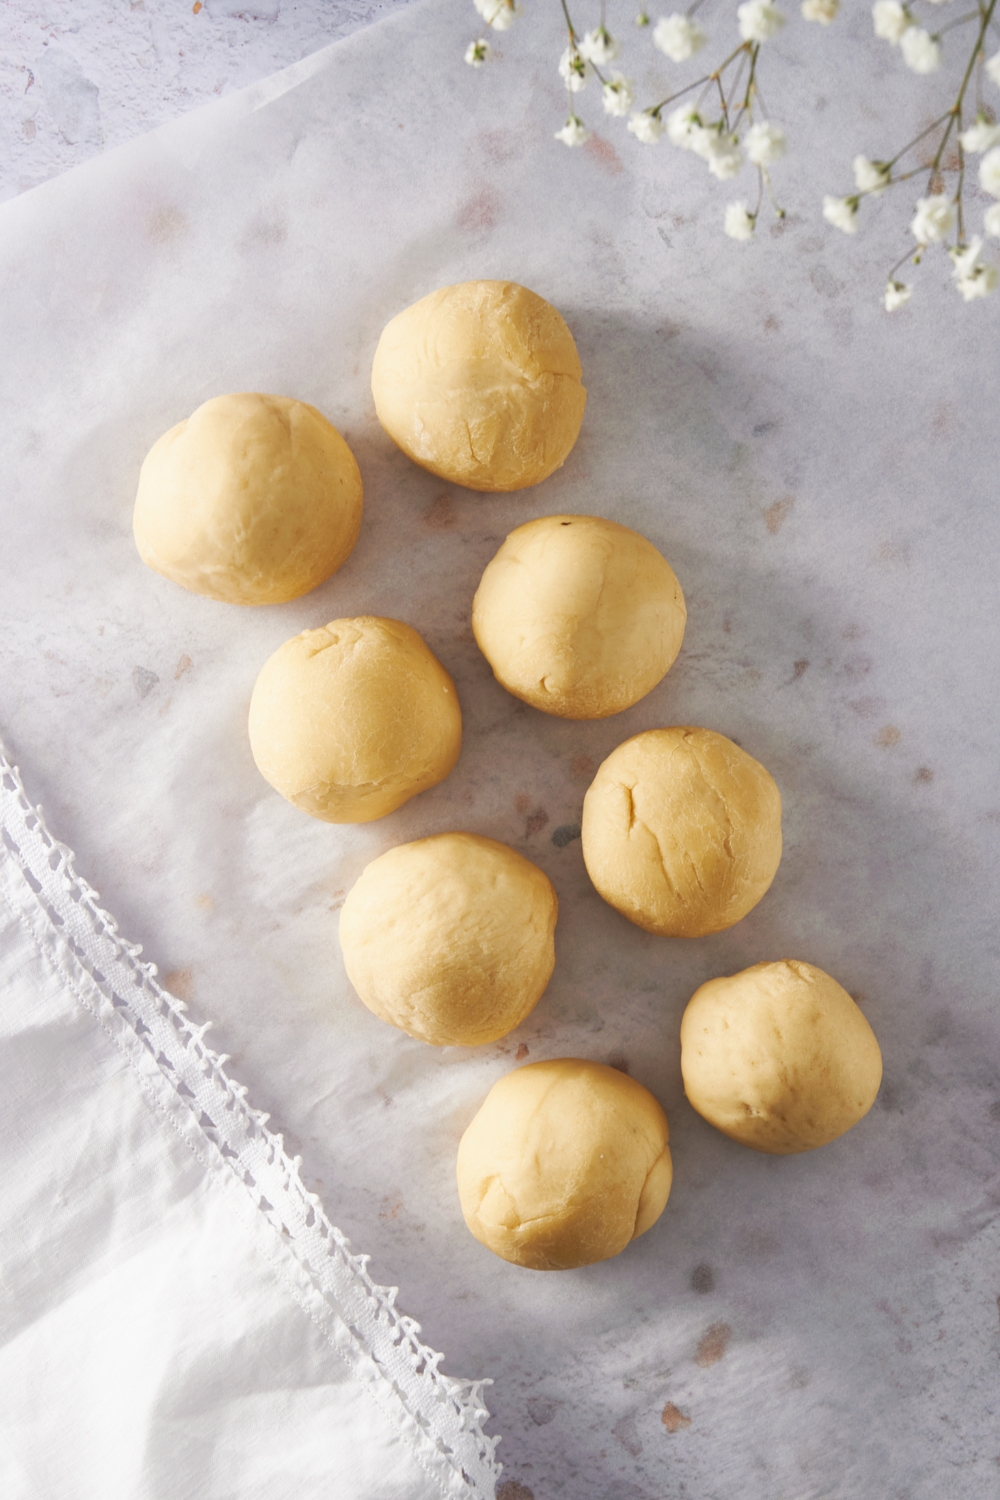 An overhead view of 8 balls of bread dough balls on parchment paper.